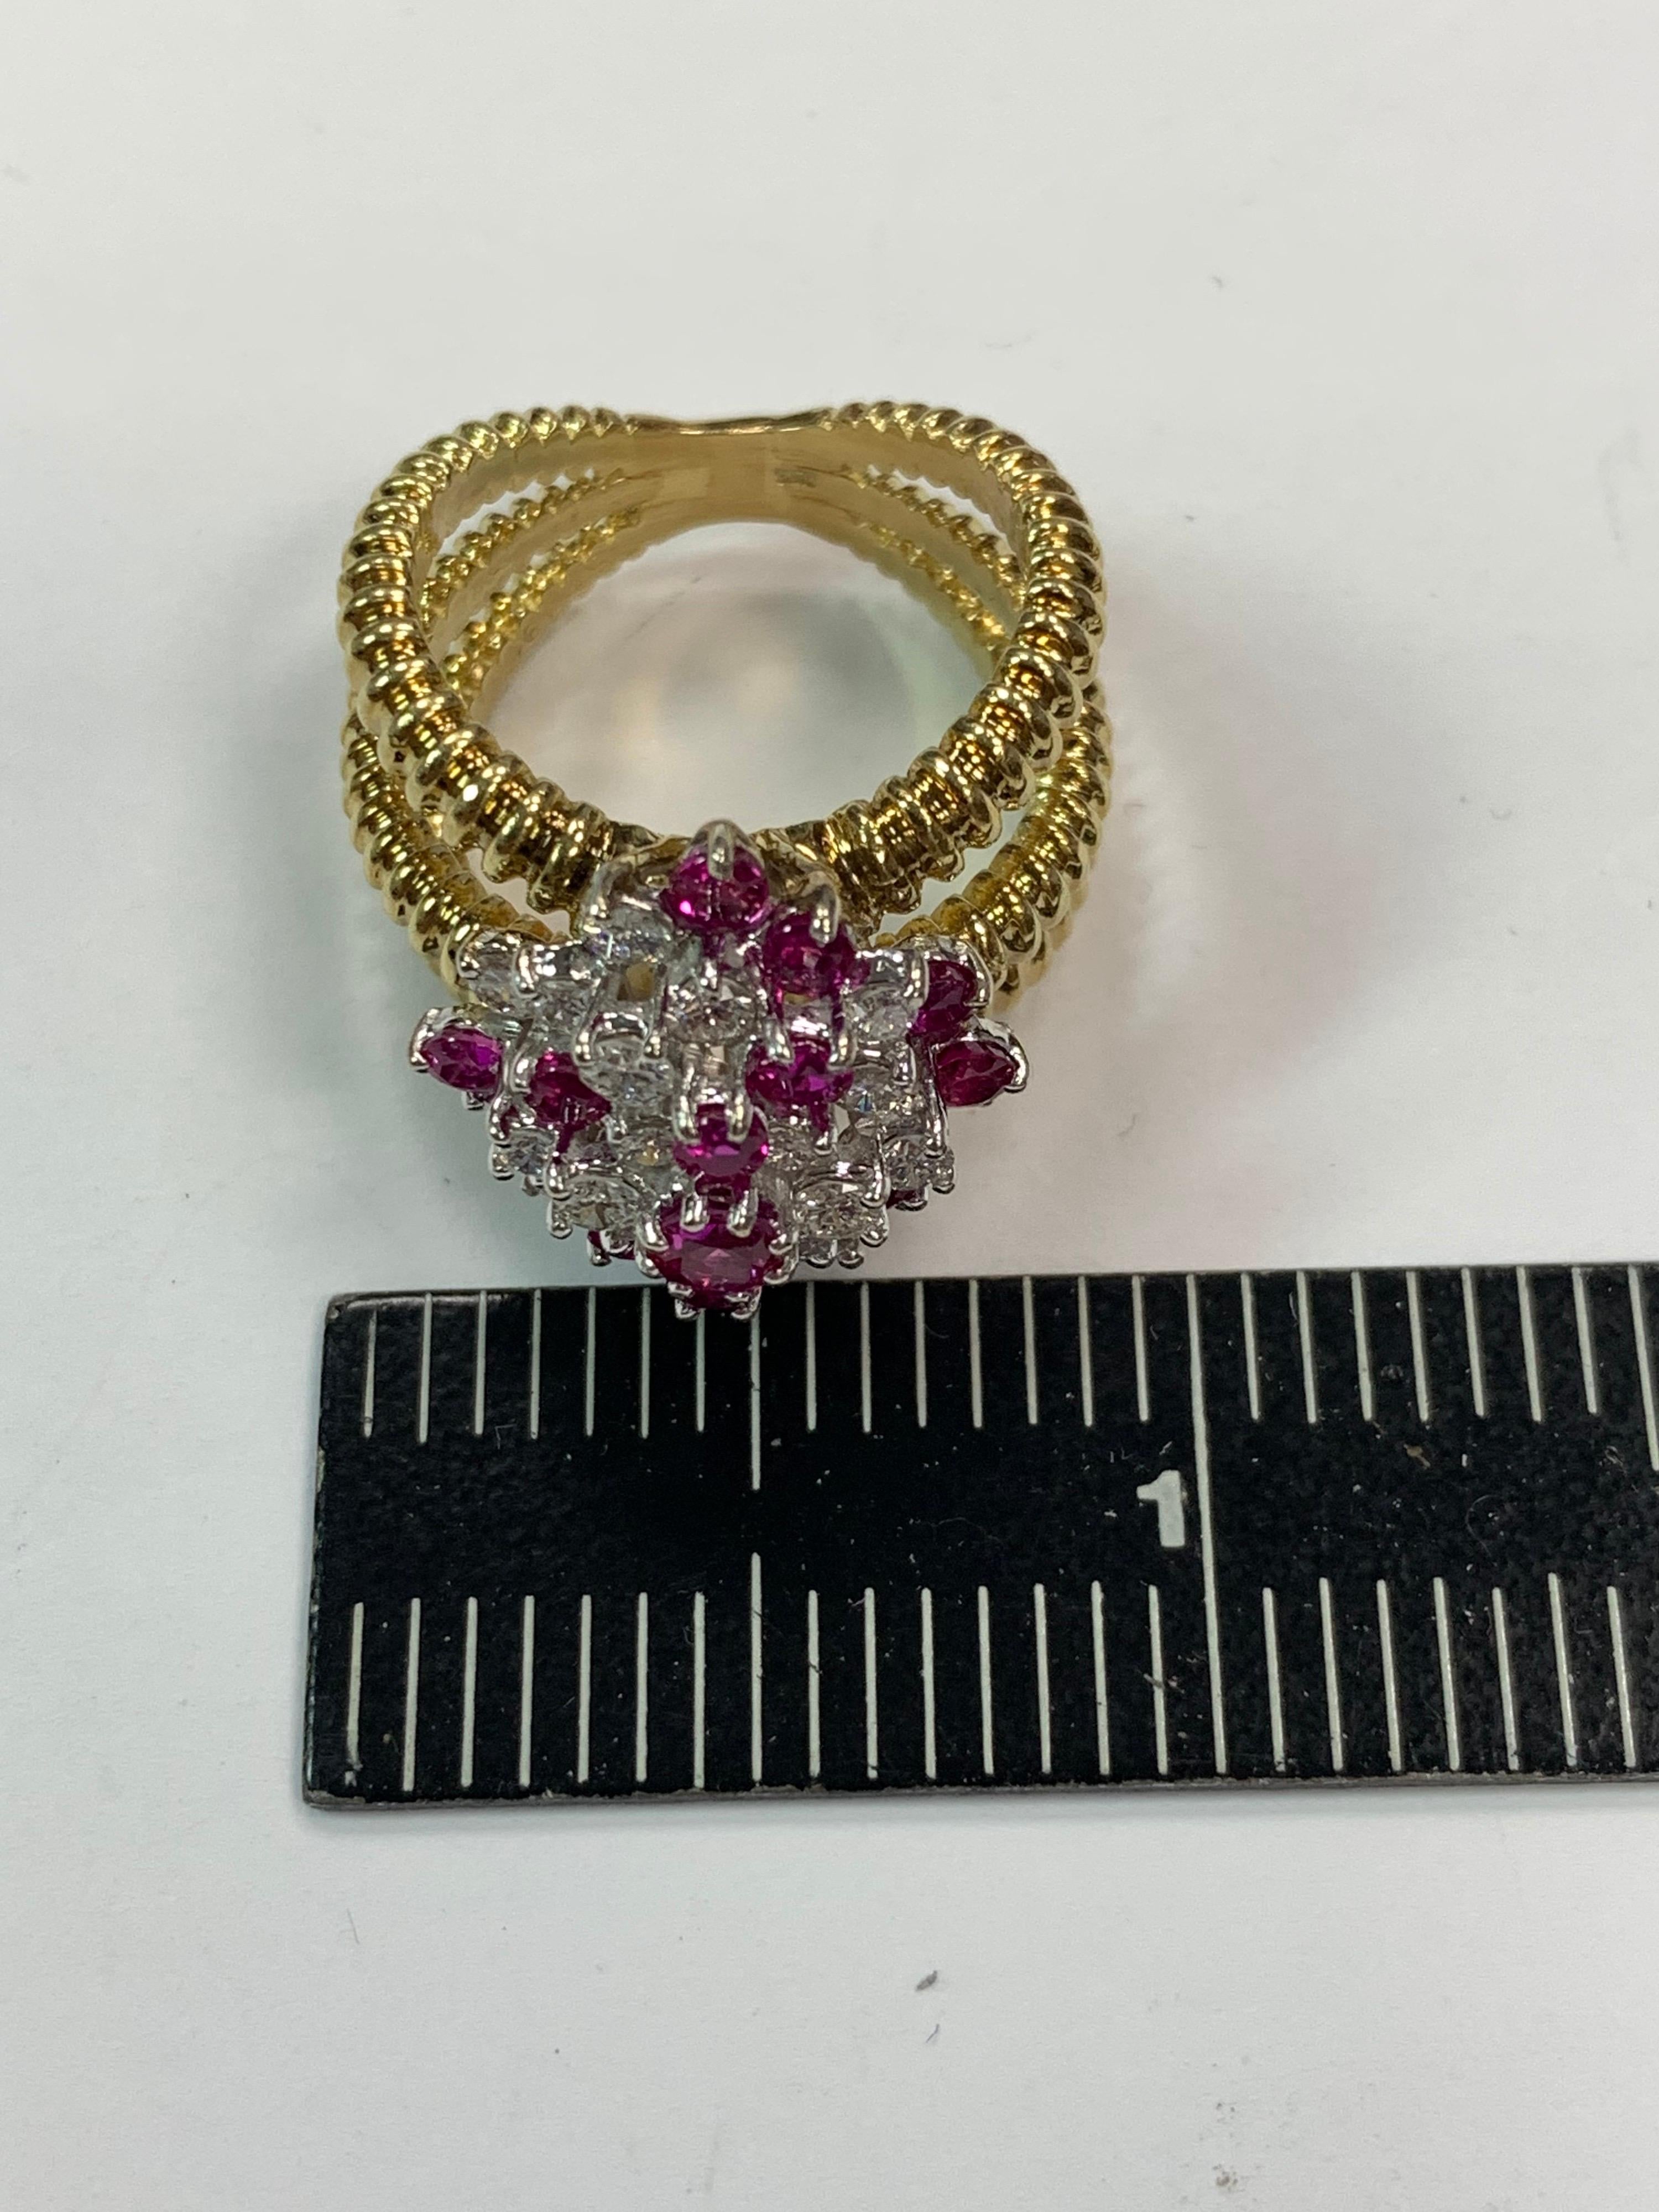 Retro Gold 2 Carat Natural Ruby Gem & Colorless Diamond Cocktail Ring Circa 1960 For Sale 6